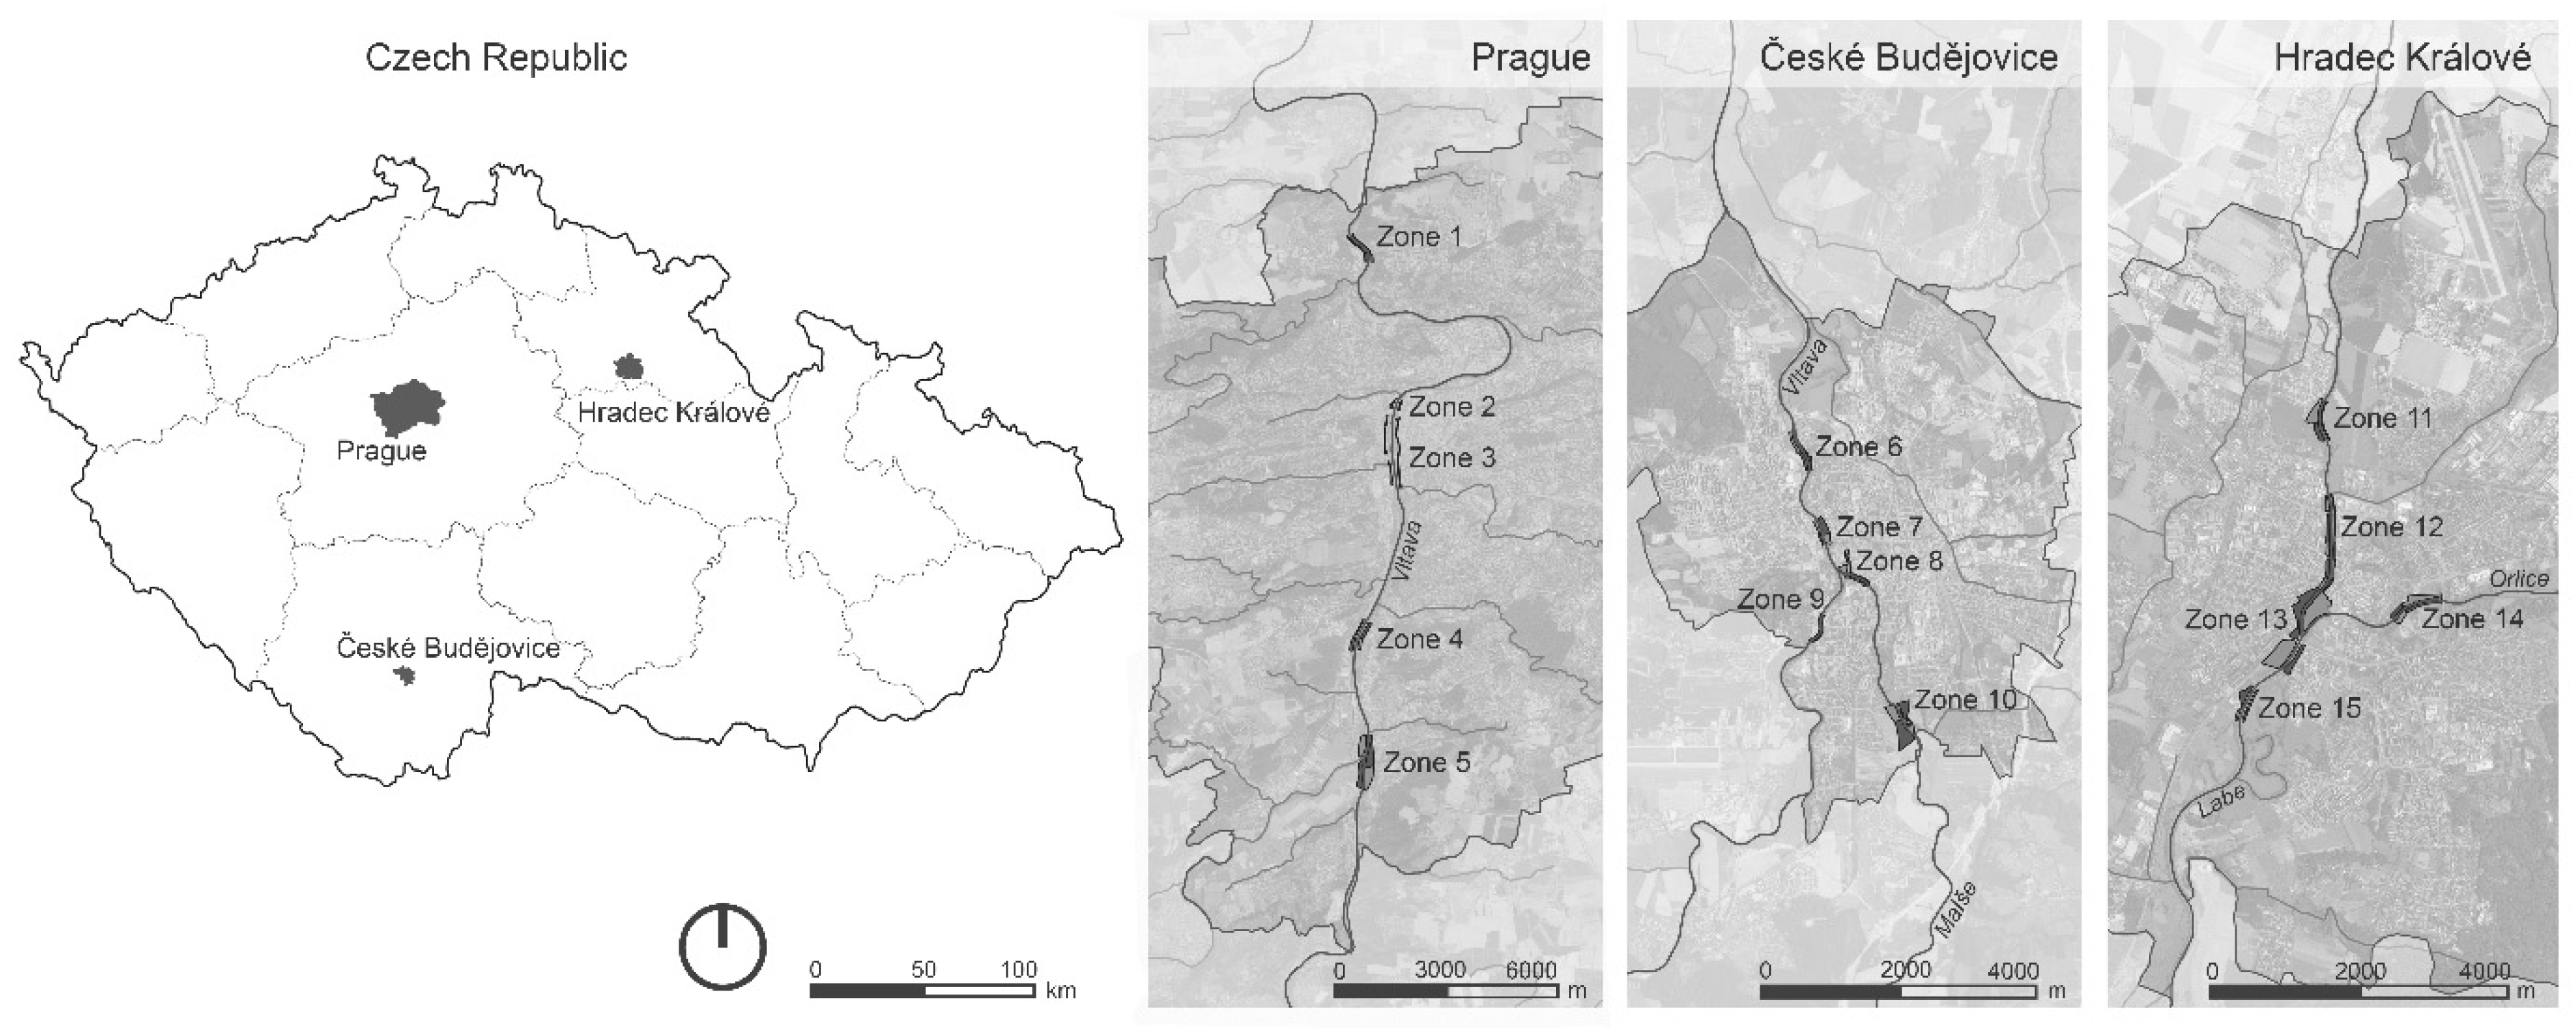 Land | Free Full-Text | Assessment of the Connectivity and Comfort of Urban  Rivers, a Case Study of the Czech Republic